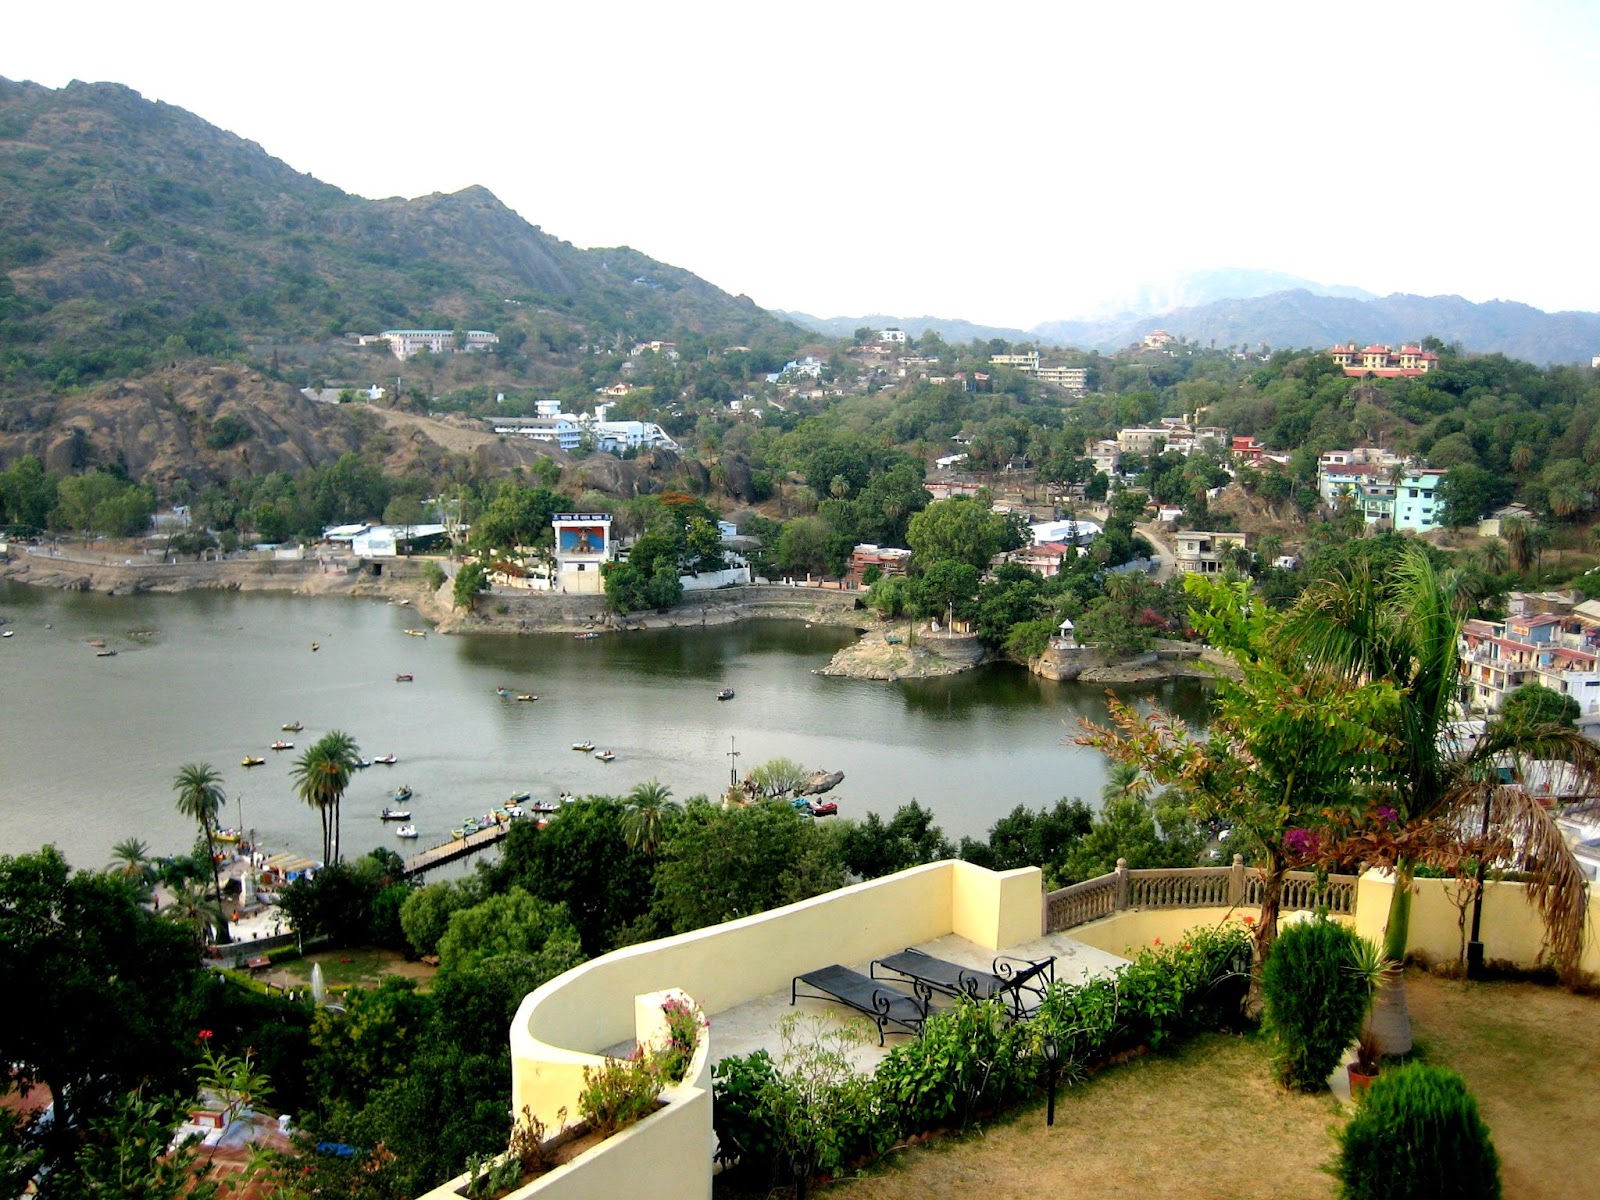 Planning your Trip to the Magical City of Mount Abu